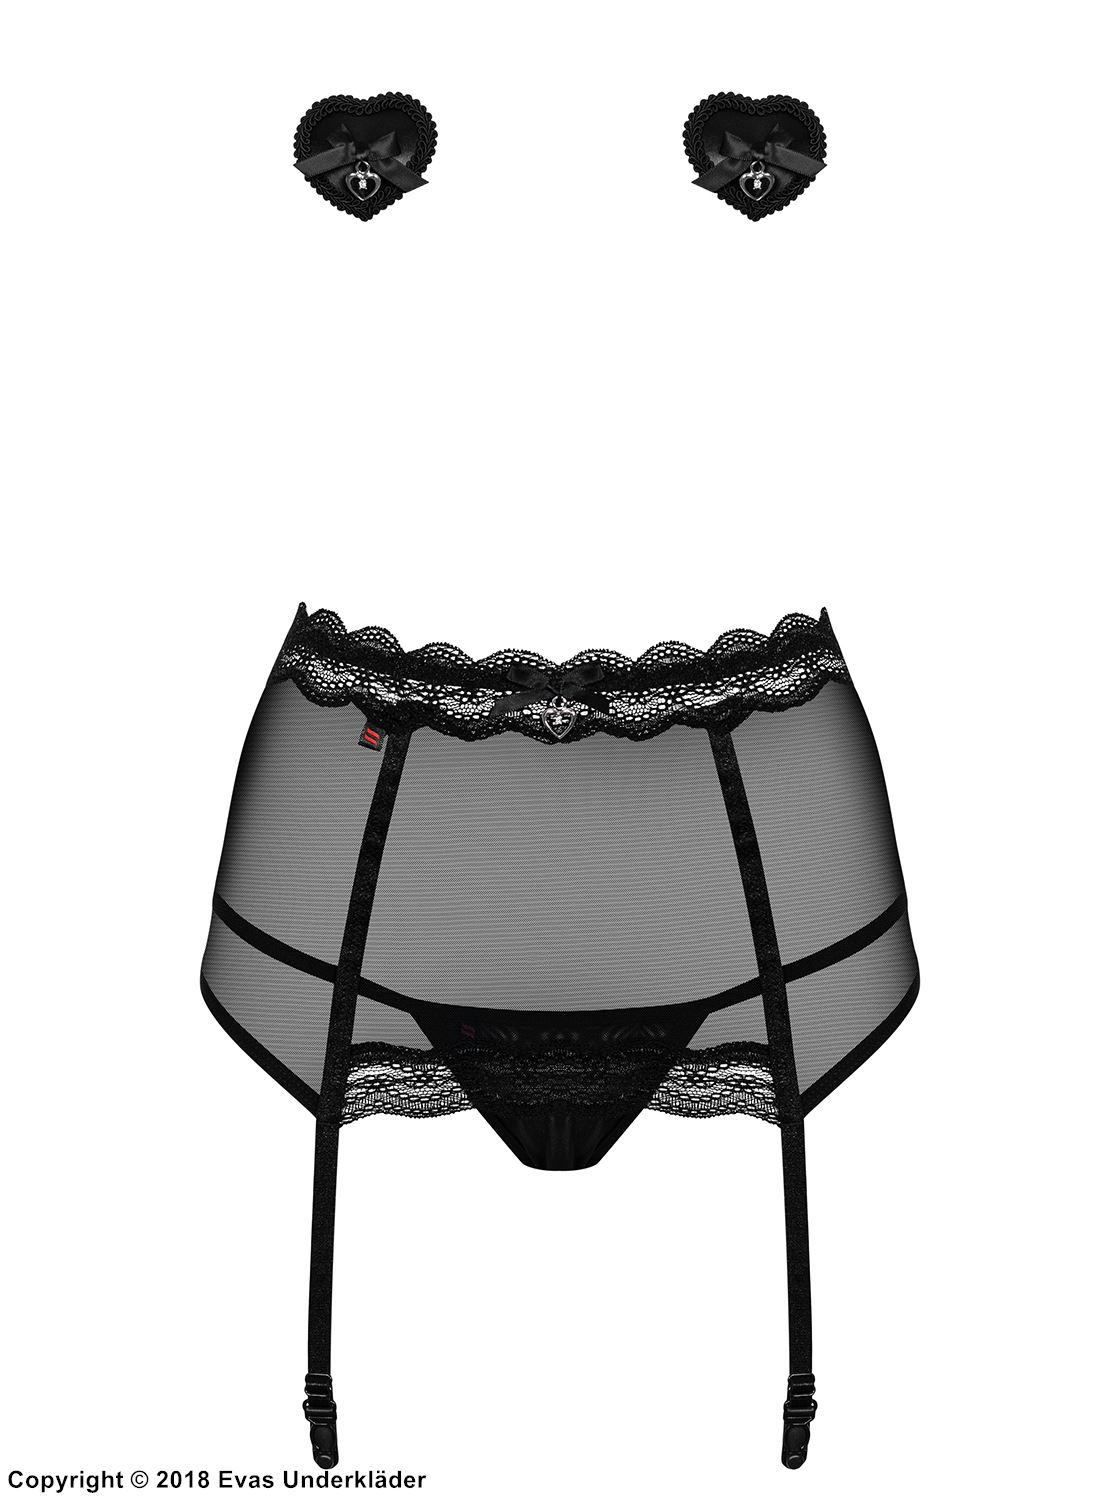 Sexy lingerie set, sheer mesh and lace, lacing, rhinestone heart